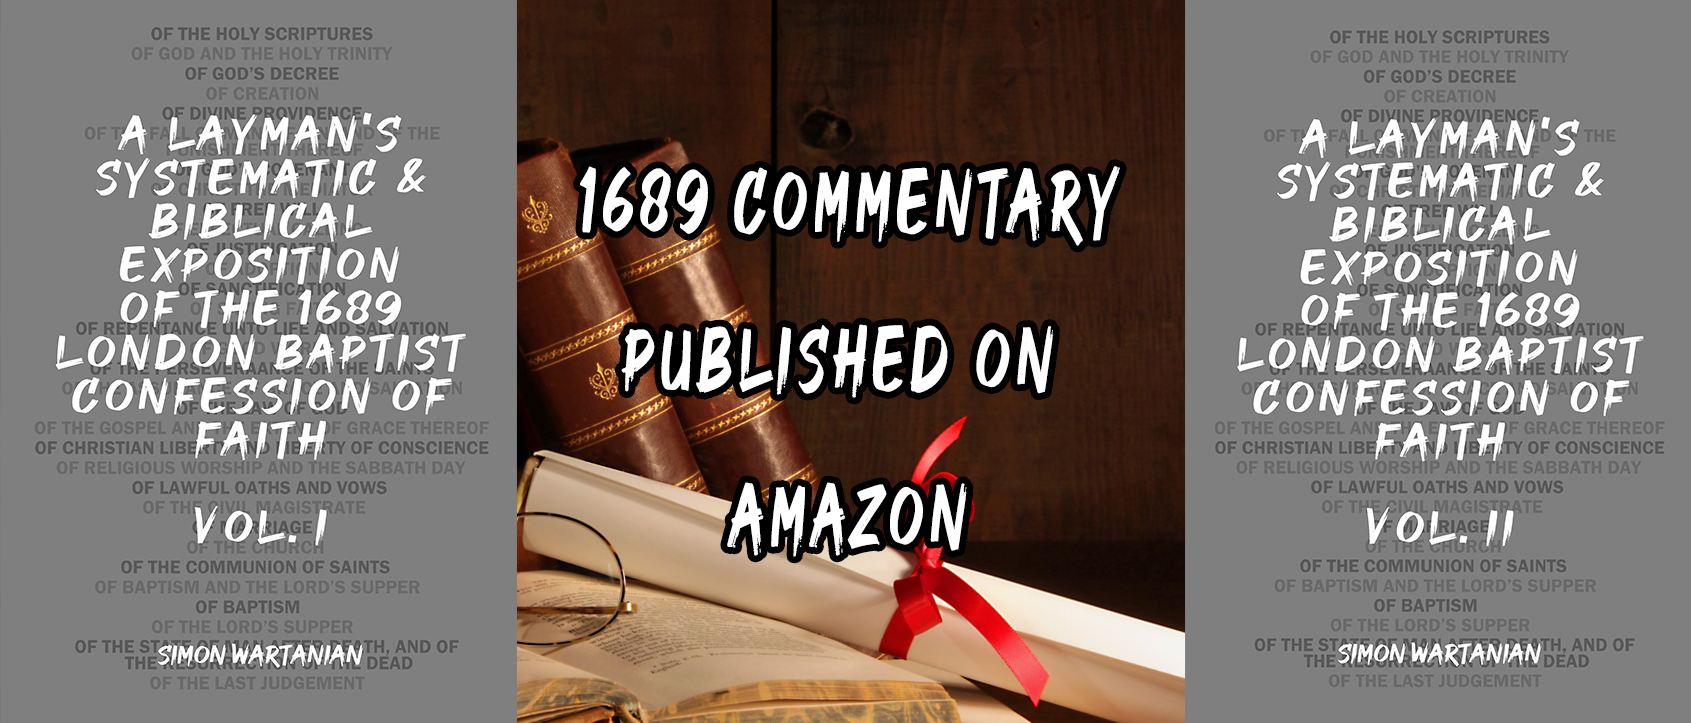 I published my commentary on the 1689 Confession of Faith